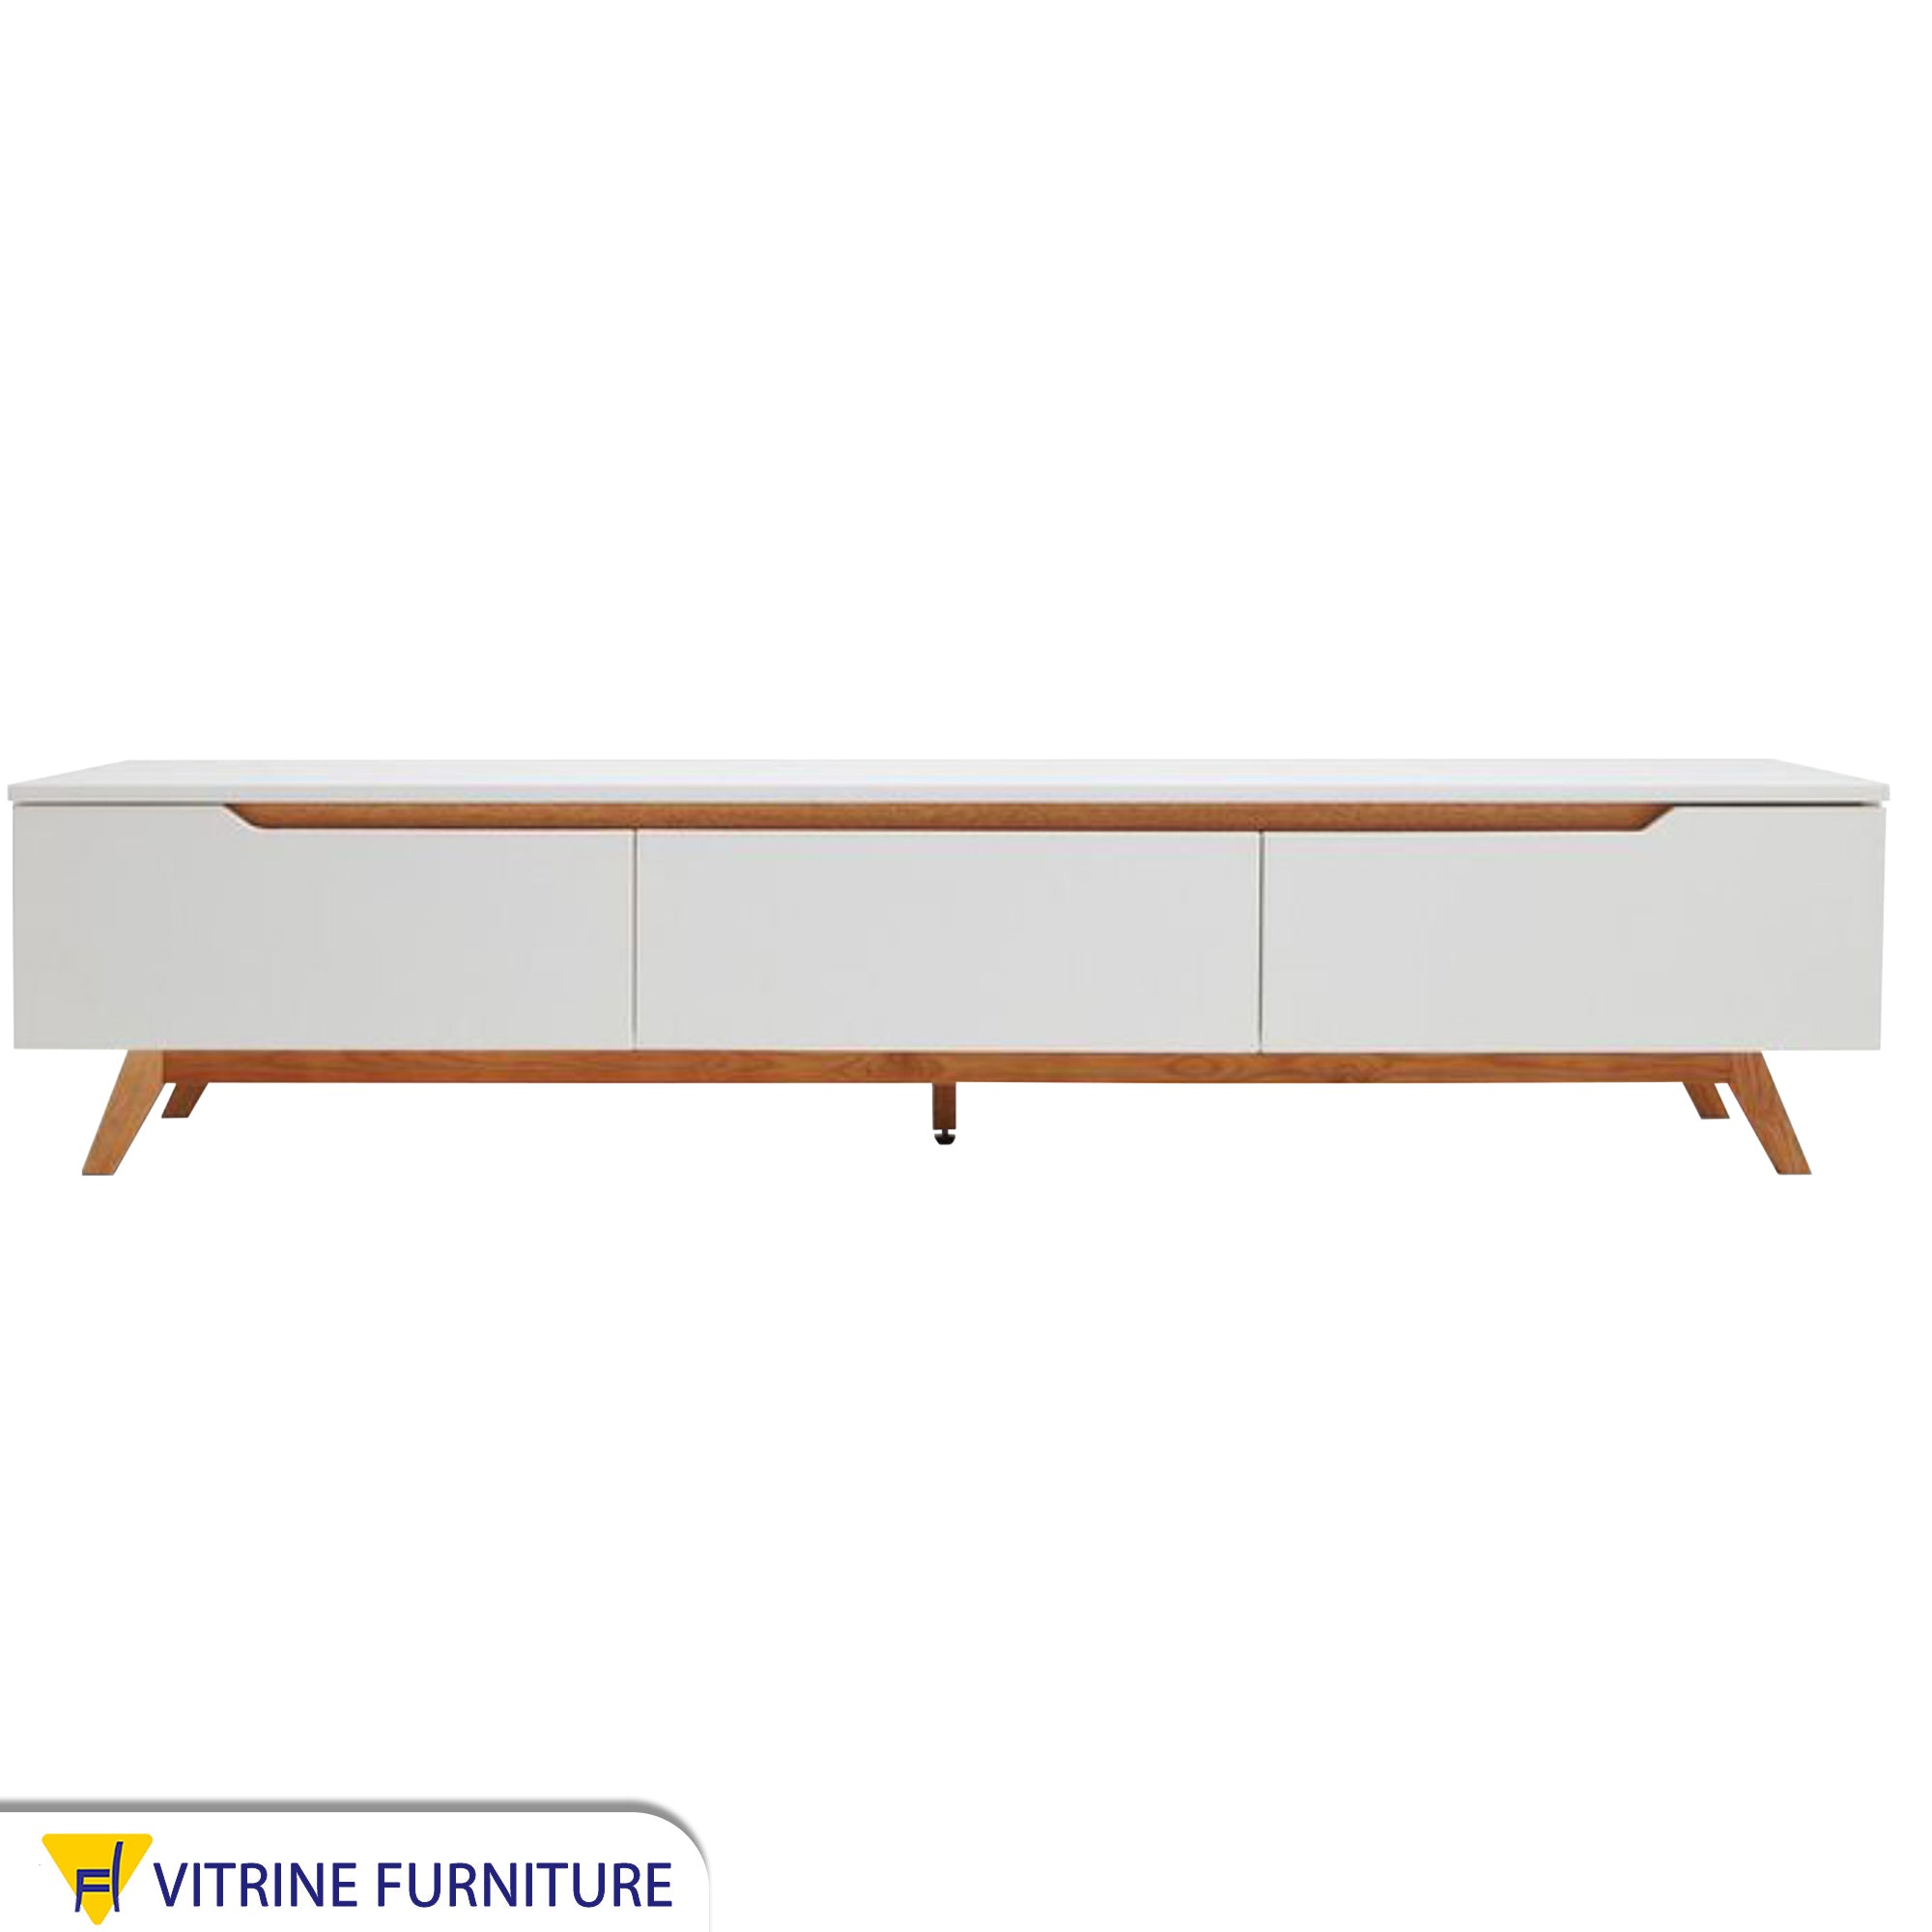 TV table with high legs, white and honey brown